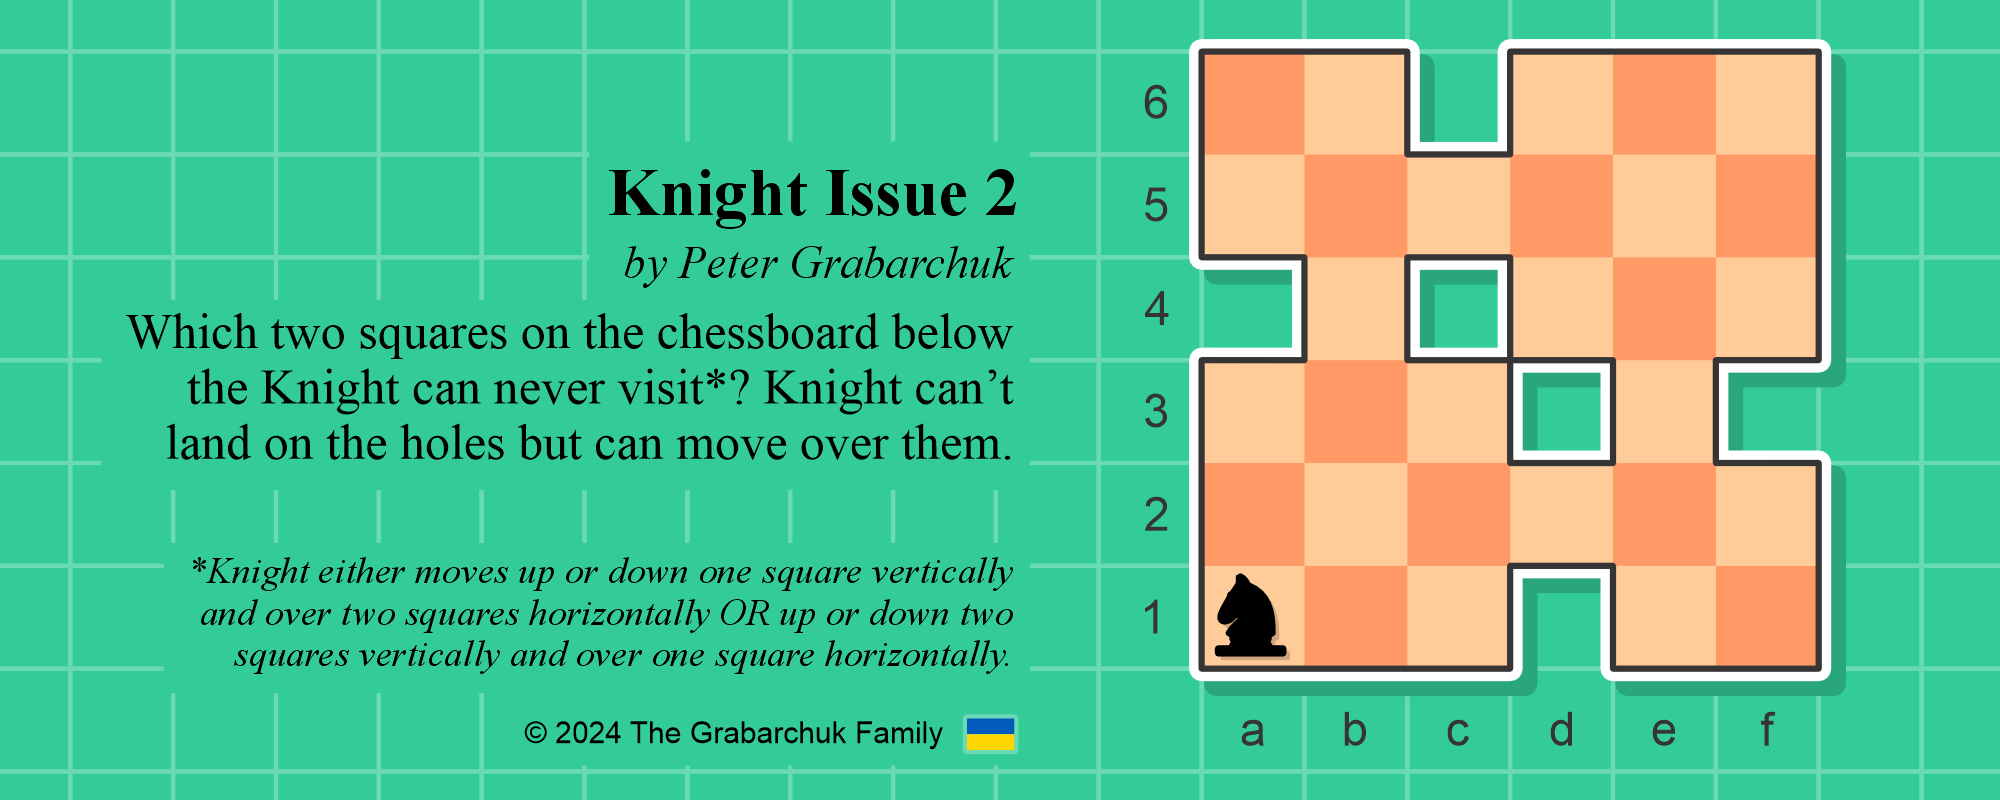 Knight Issue 2 by Peter Grabarchuk